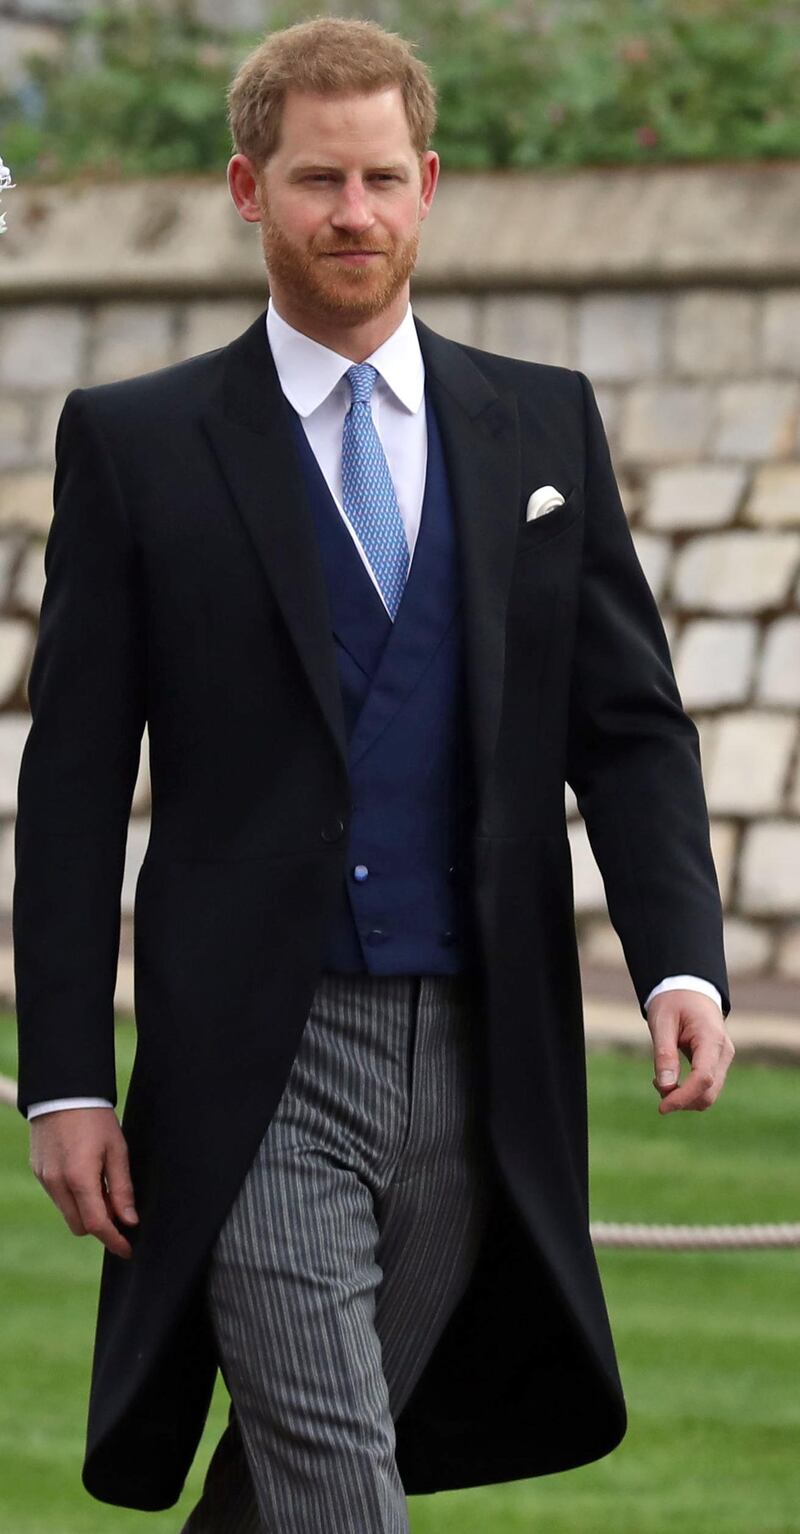 Britain's Prince Harry, Duke of Sussex arrives at St George's Chapel in Windsor Castle, Windsor, west of London, on May 18, 2019, to attend the wedding of Lady Gabriella Windsor to Thomas Kingston. - Lady Gabriella, is the daughter of Prince and Princess Michael of Kent. Prince Michael, is the Queen Elizabeth II's cousin. (Photo by Steve Parsons / POOL / AFP)